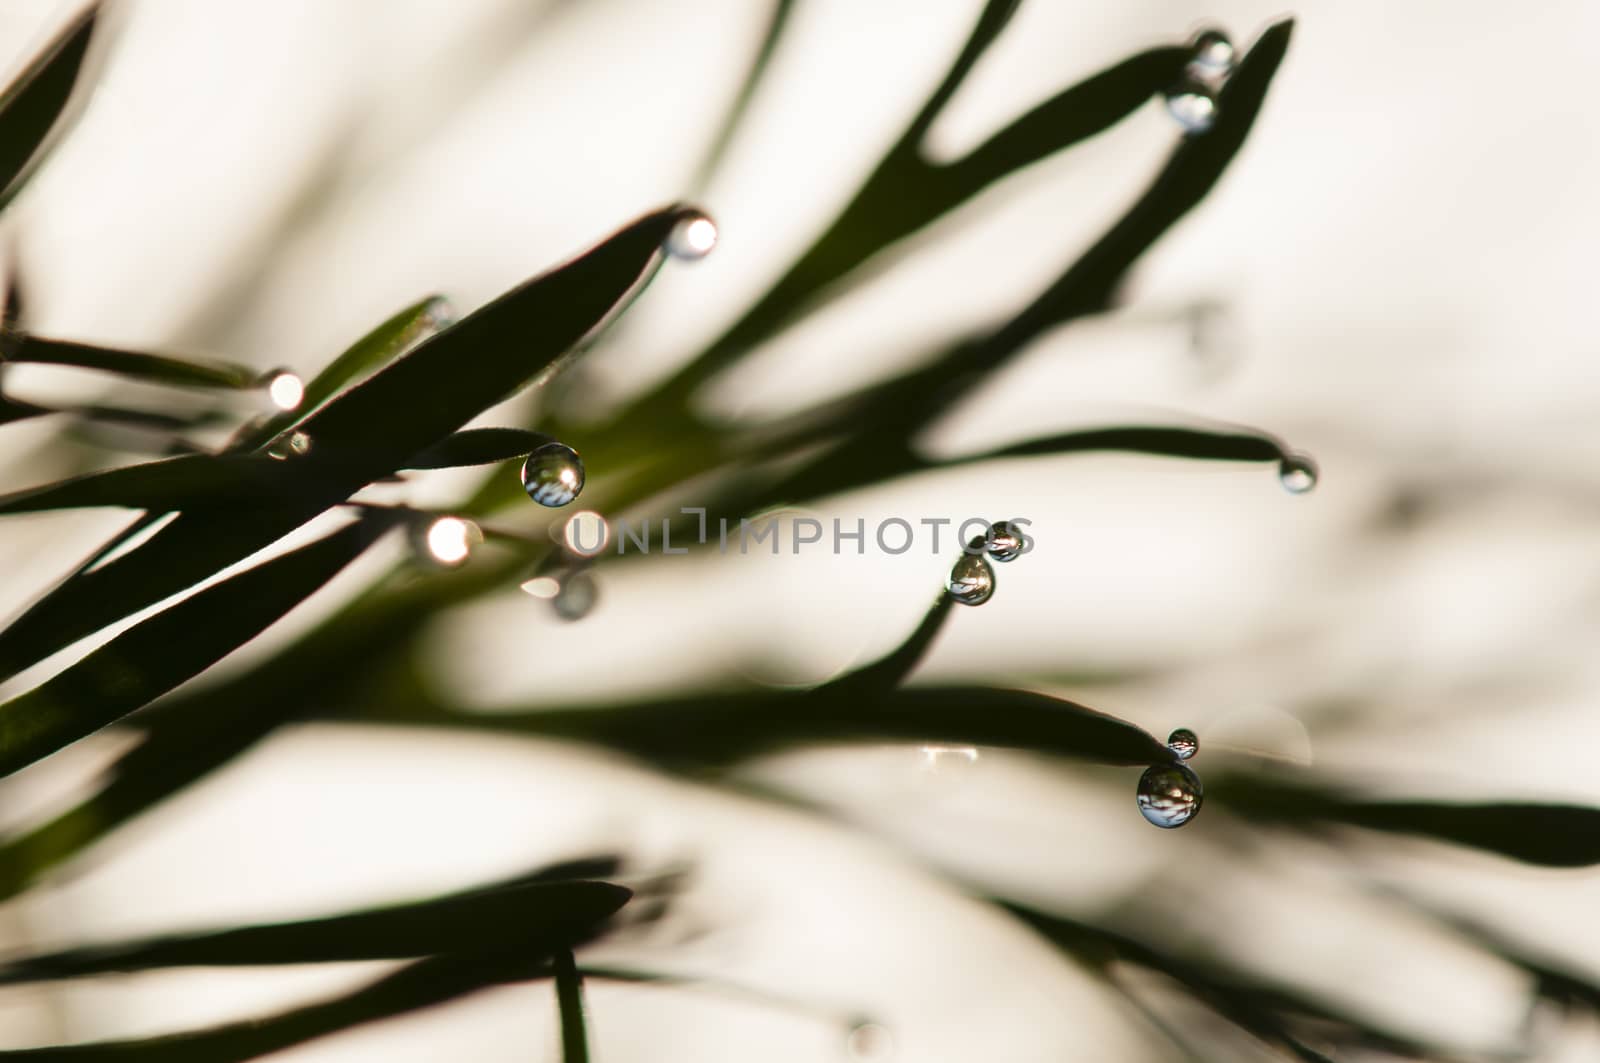 Dew drops on blades of grass in sun backlight